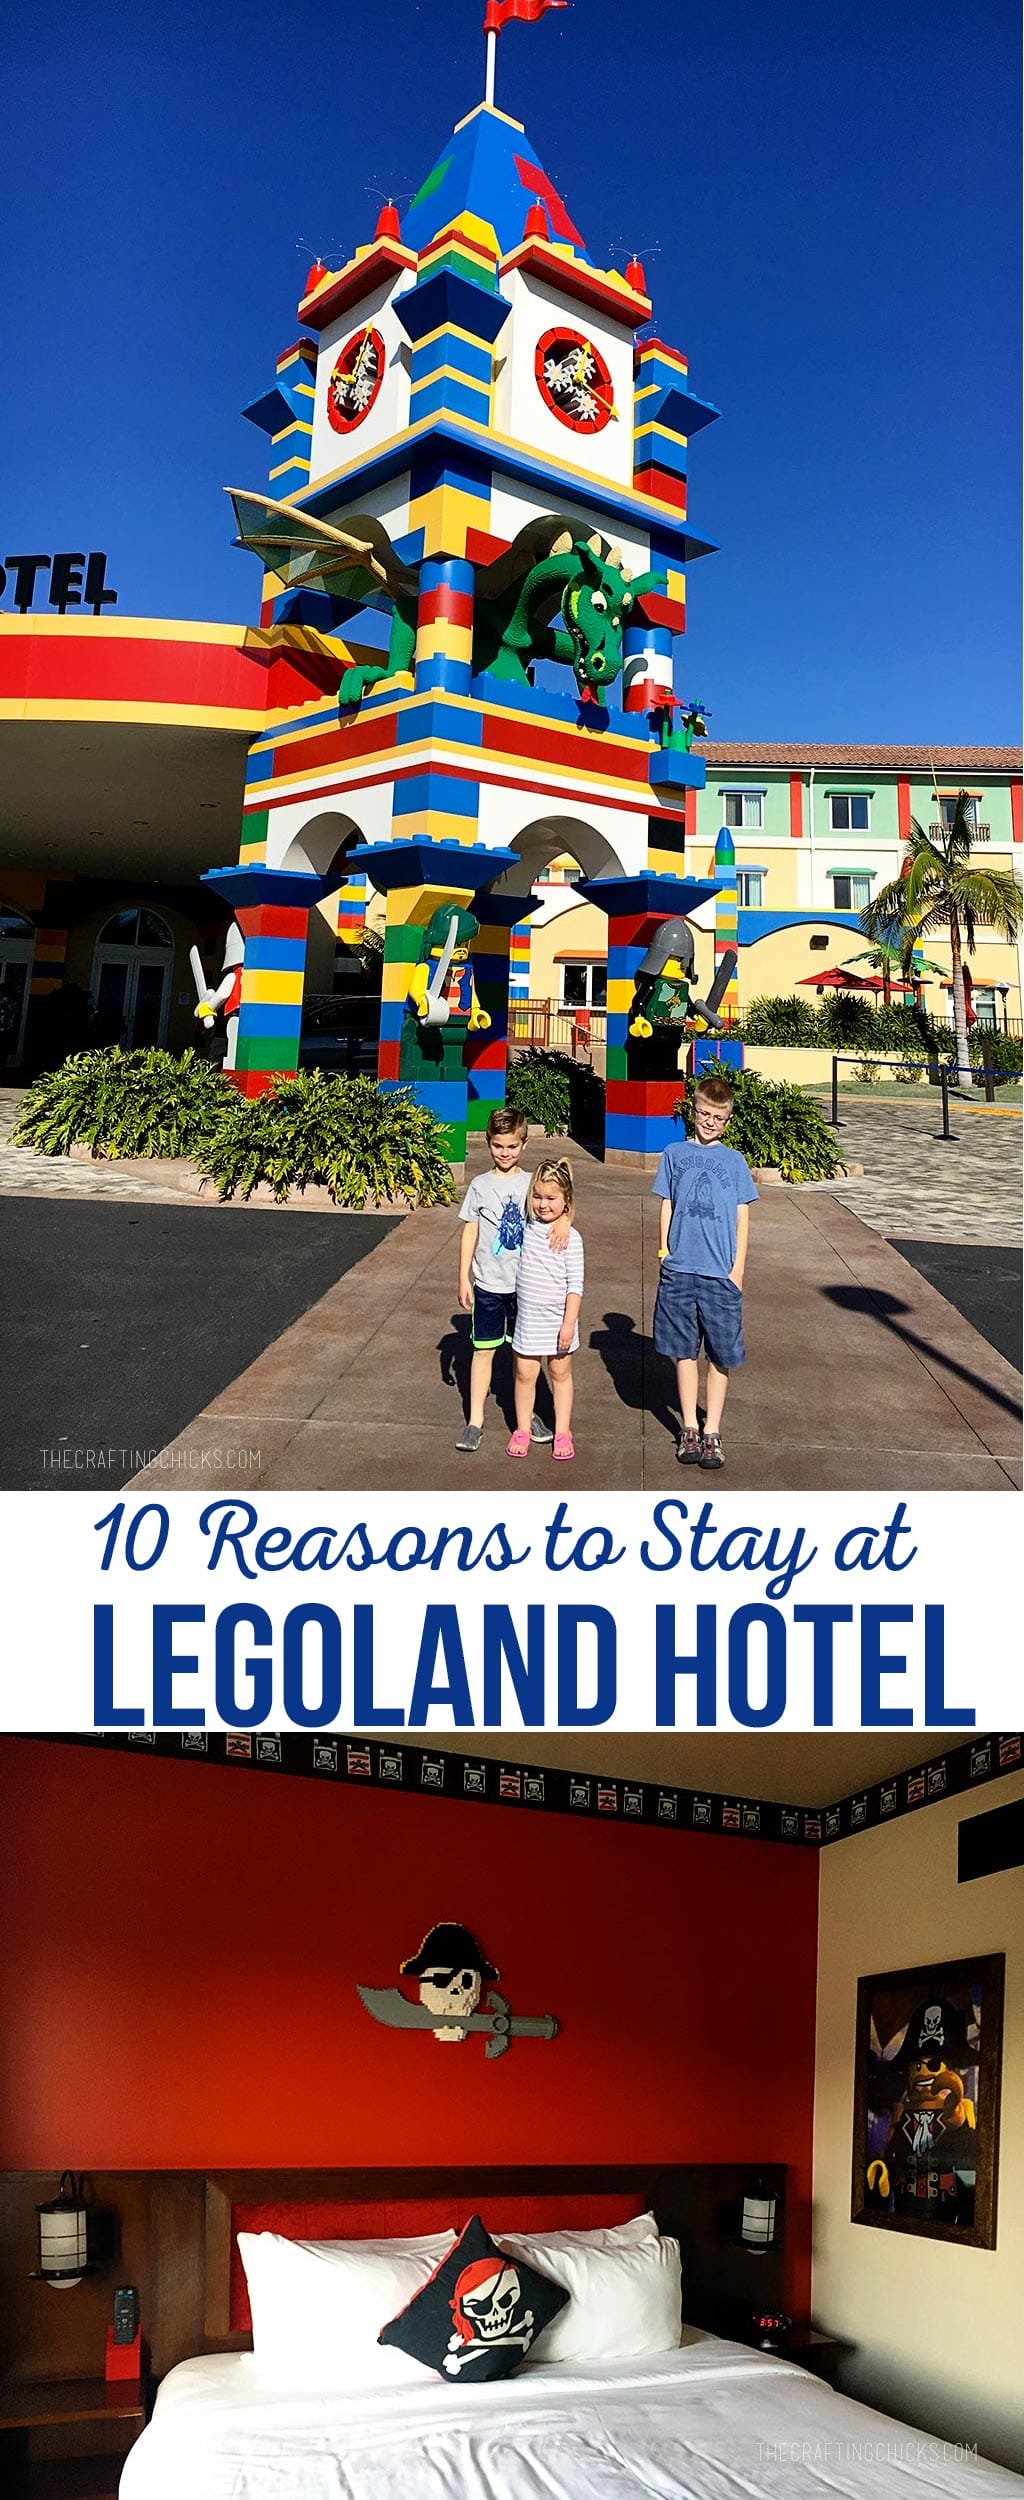 10 Reasons to Stay at Legoland hotel